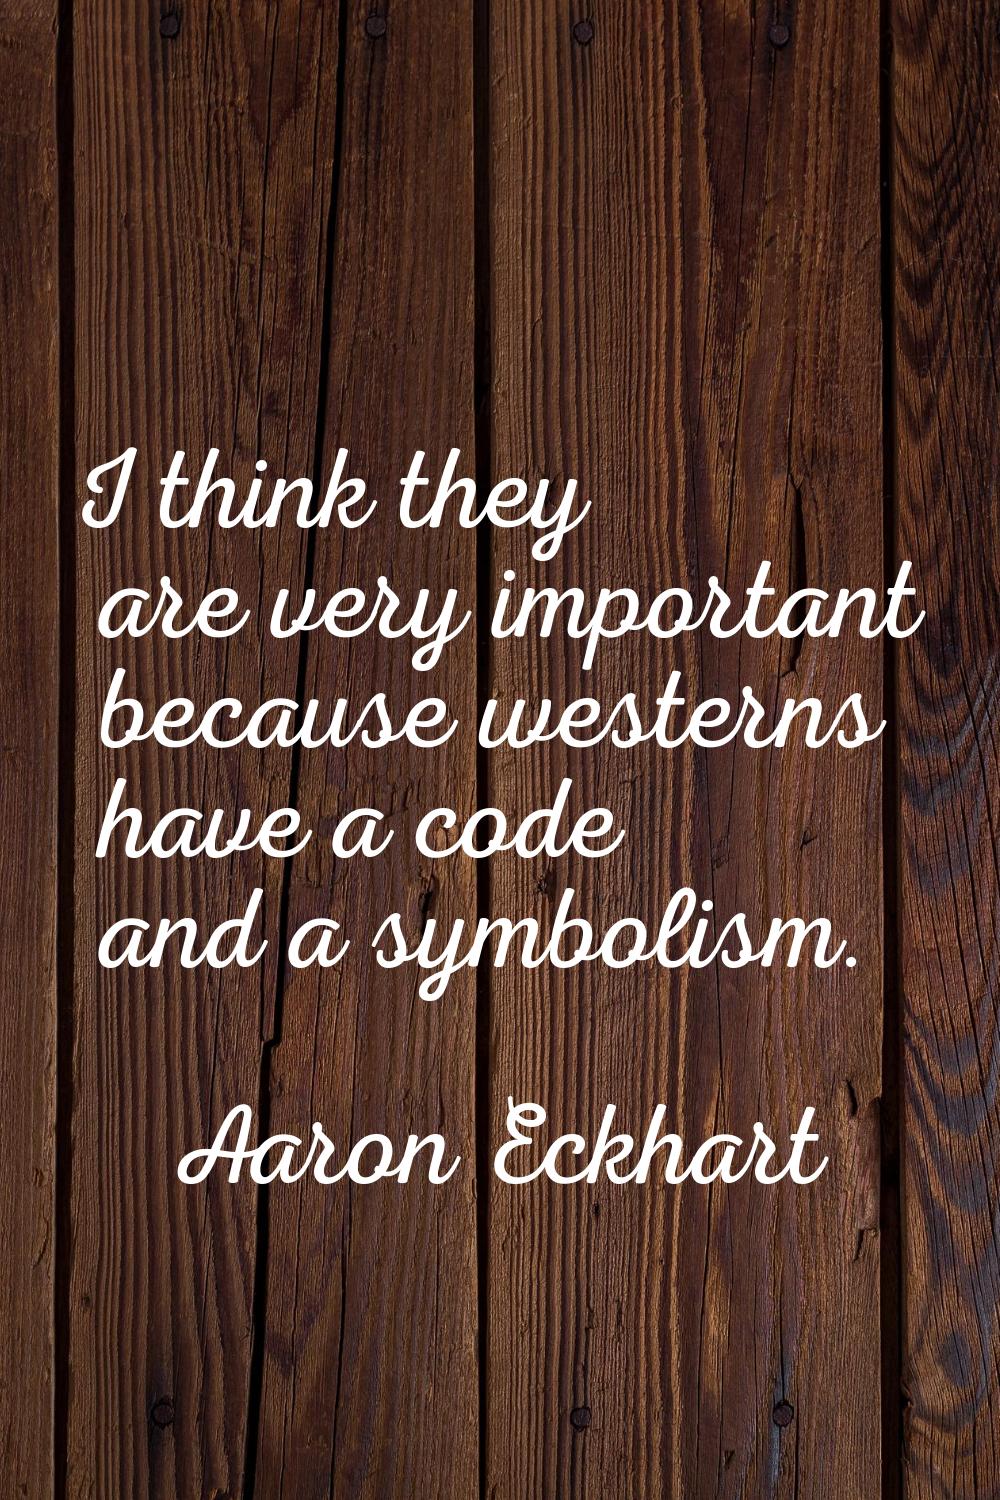 I think they are very important because westerns have a code and a symbolism.